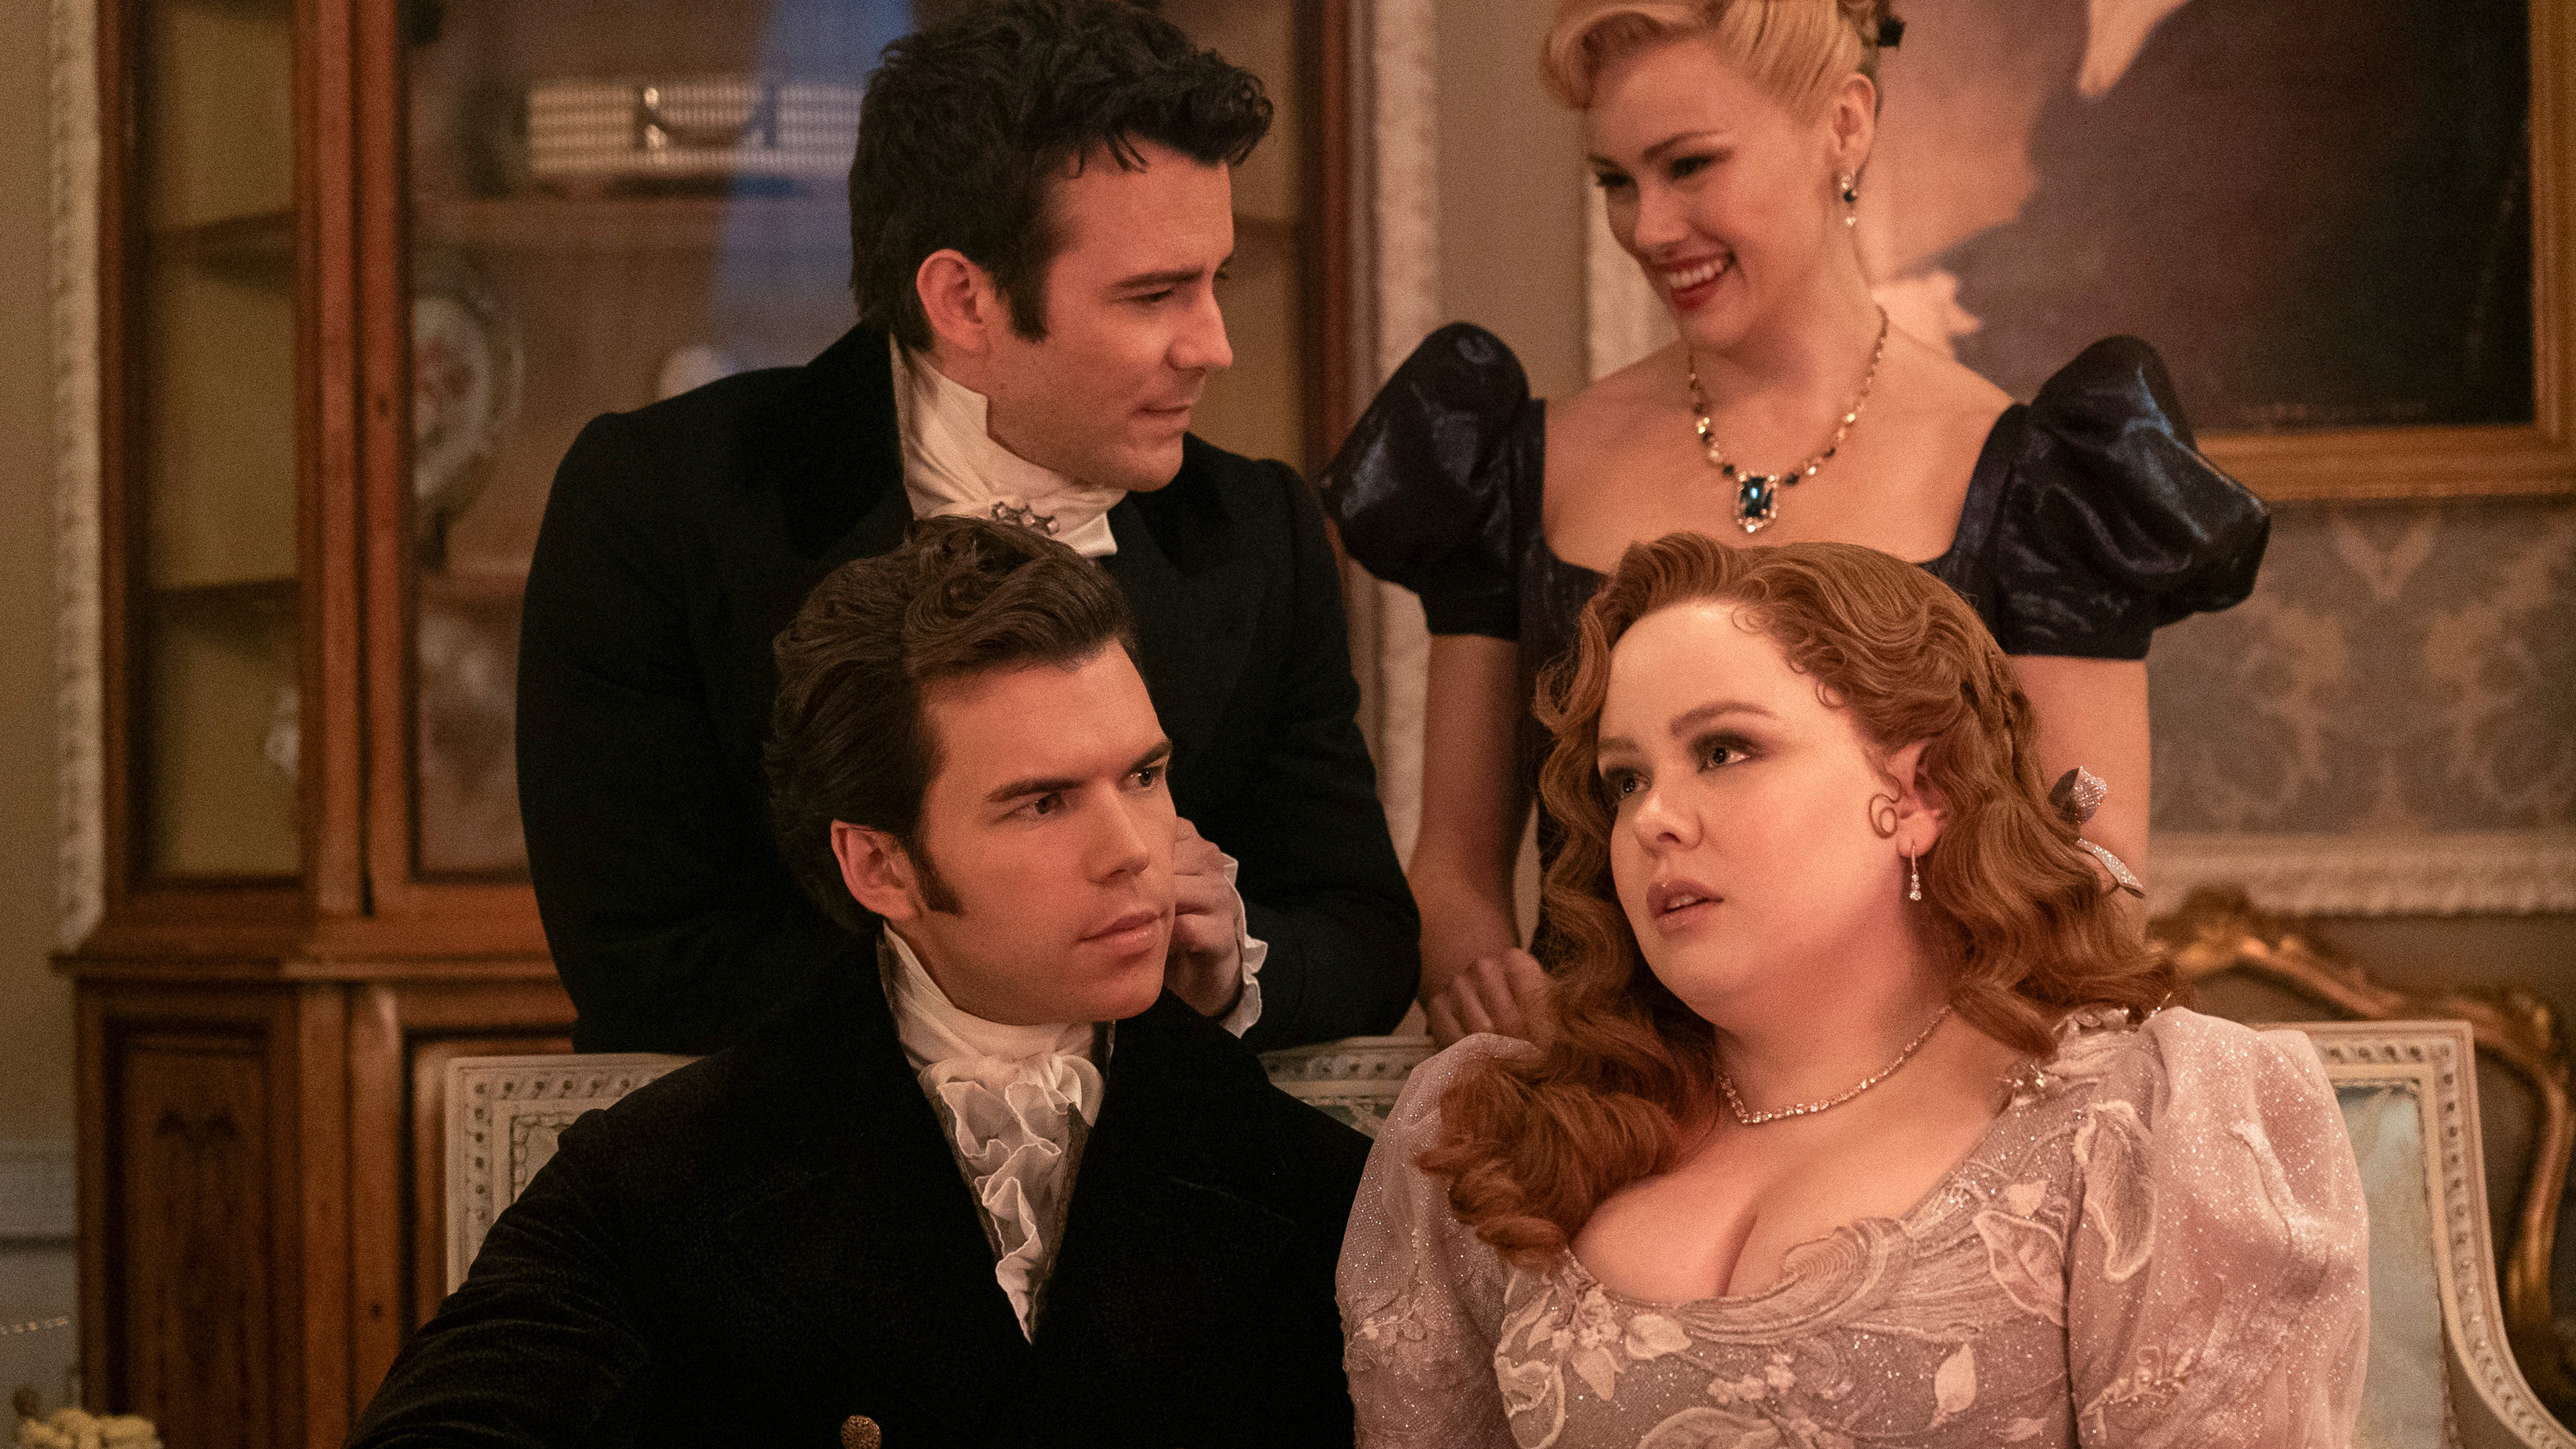 A scene from Bridgerton showing Penelope sitting with Colin